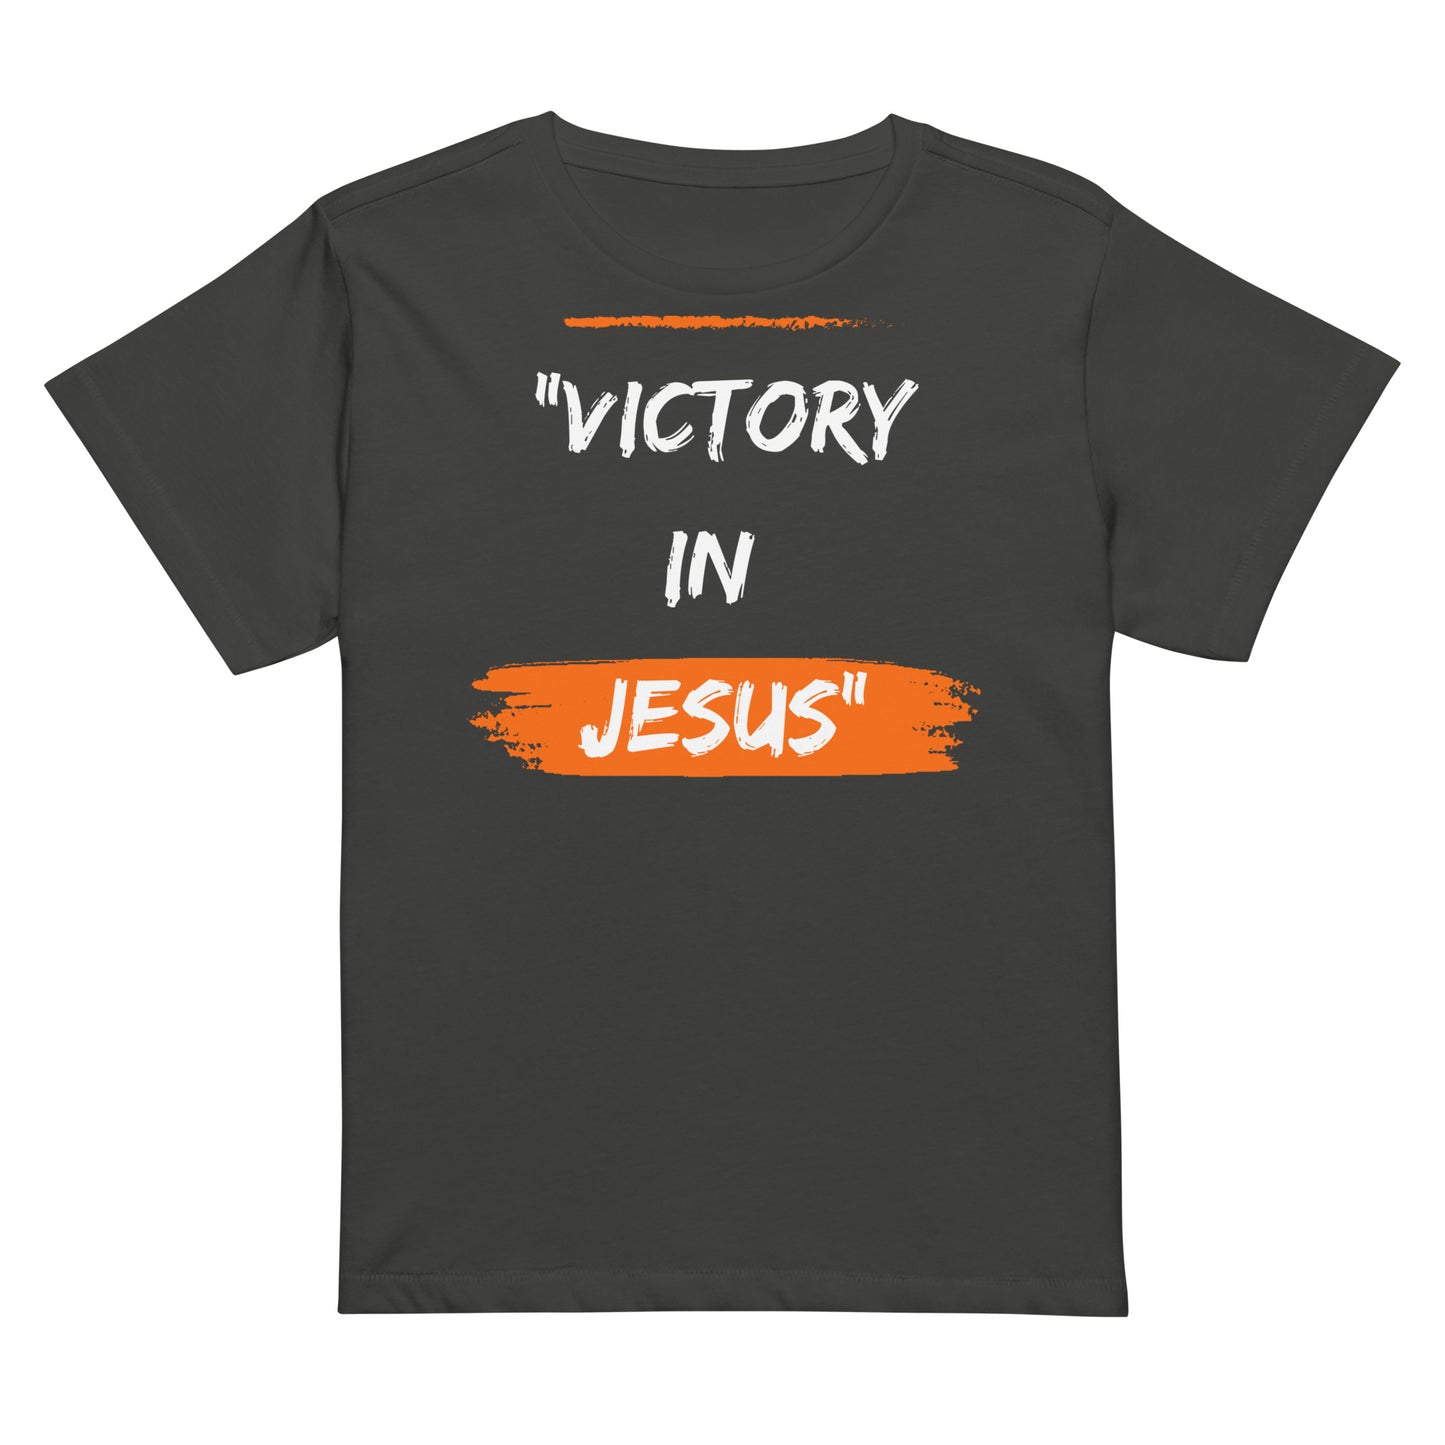 Women’s high-waisted t-shirt - Victory in Jesus